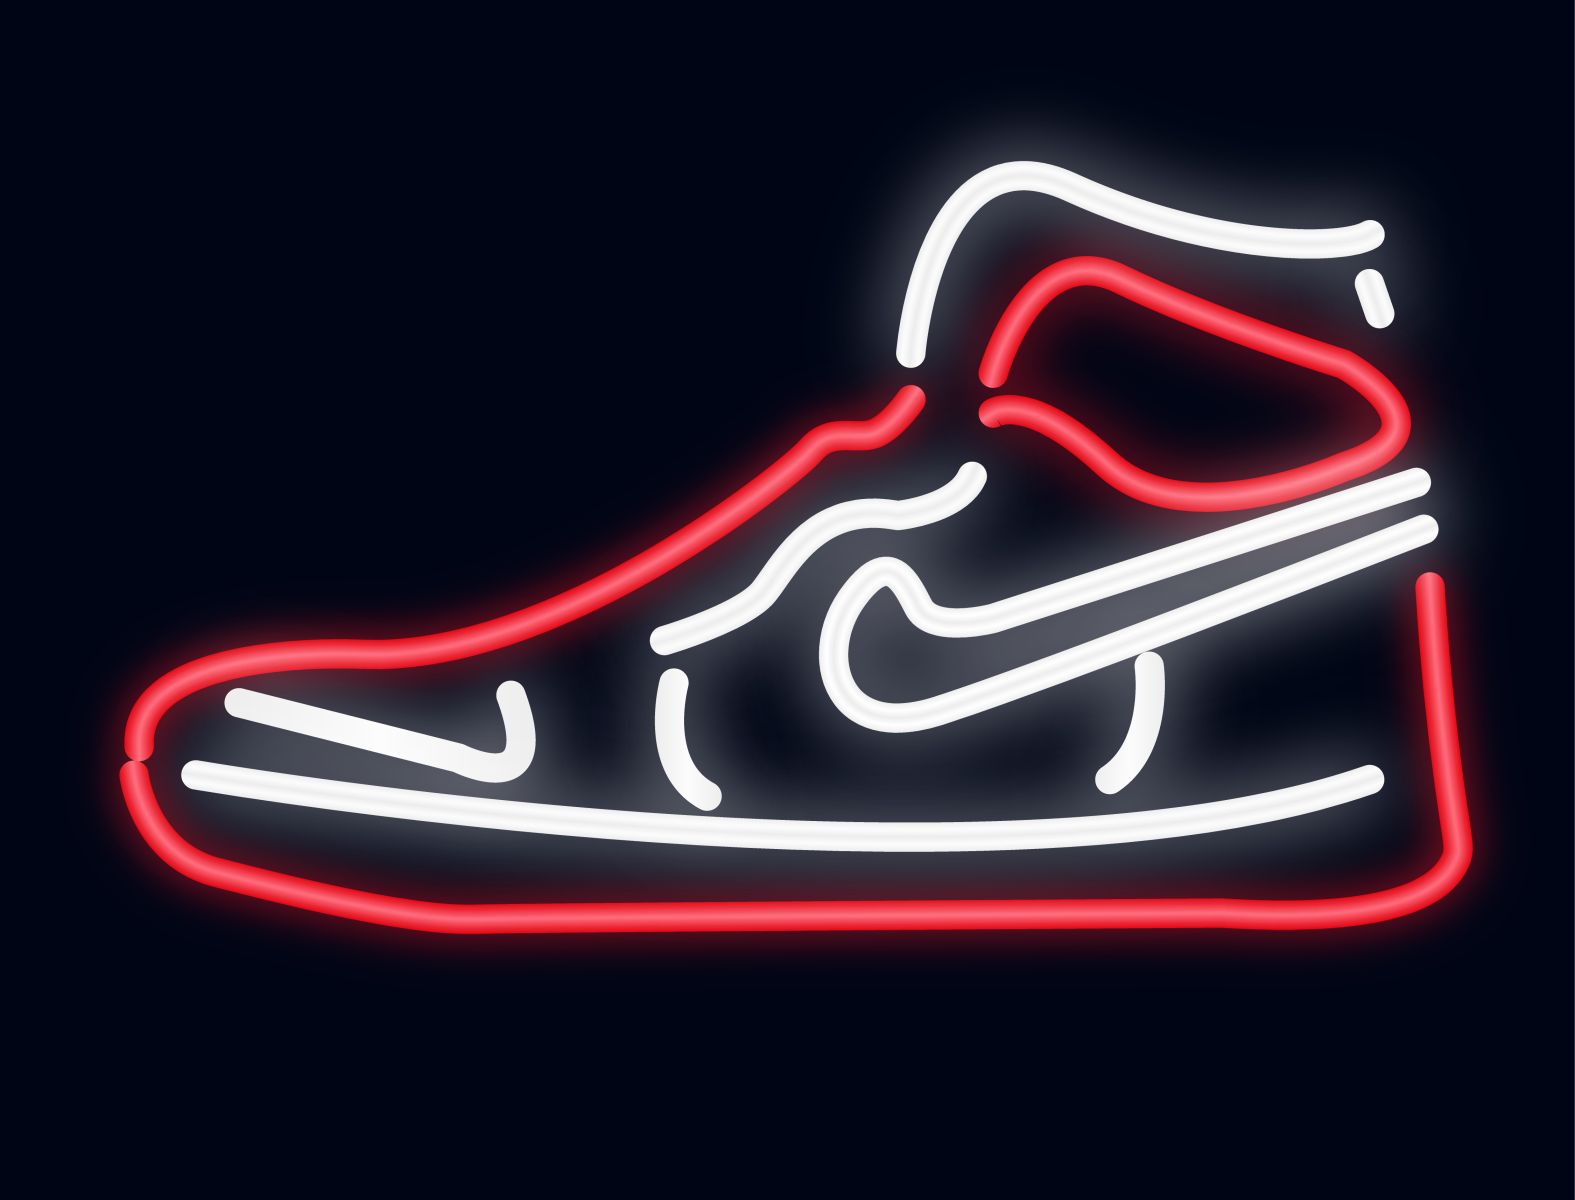 Neon Shoe by i Suck at Design on Dribbble